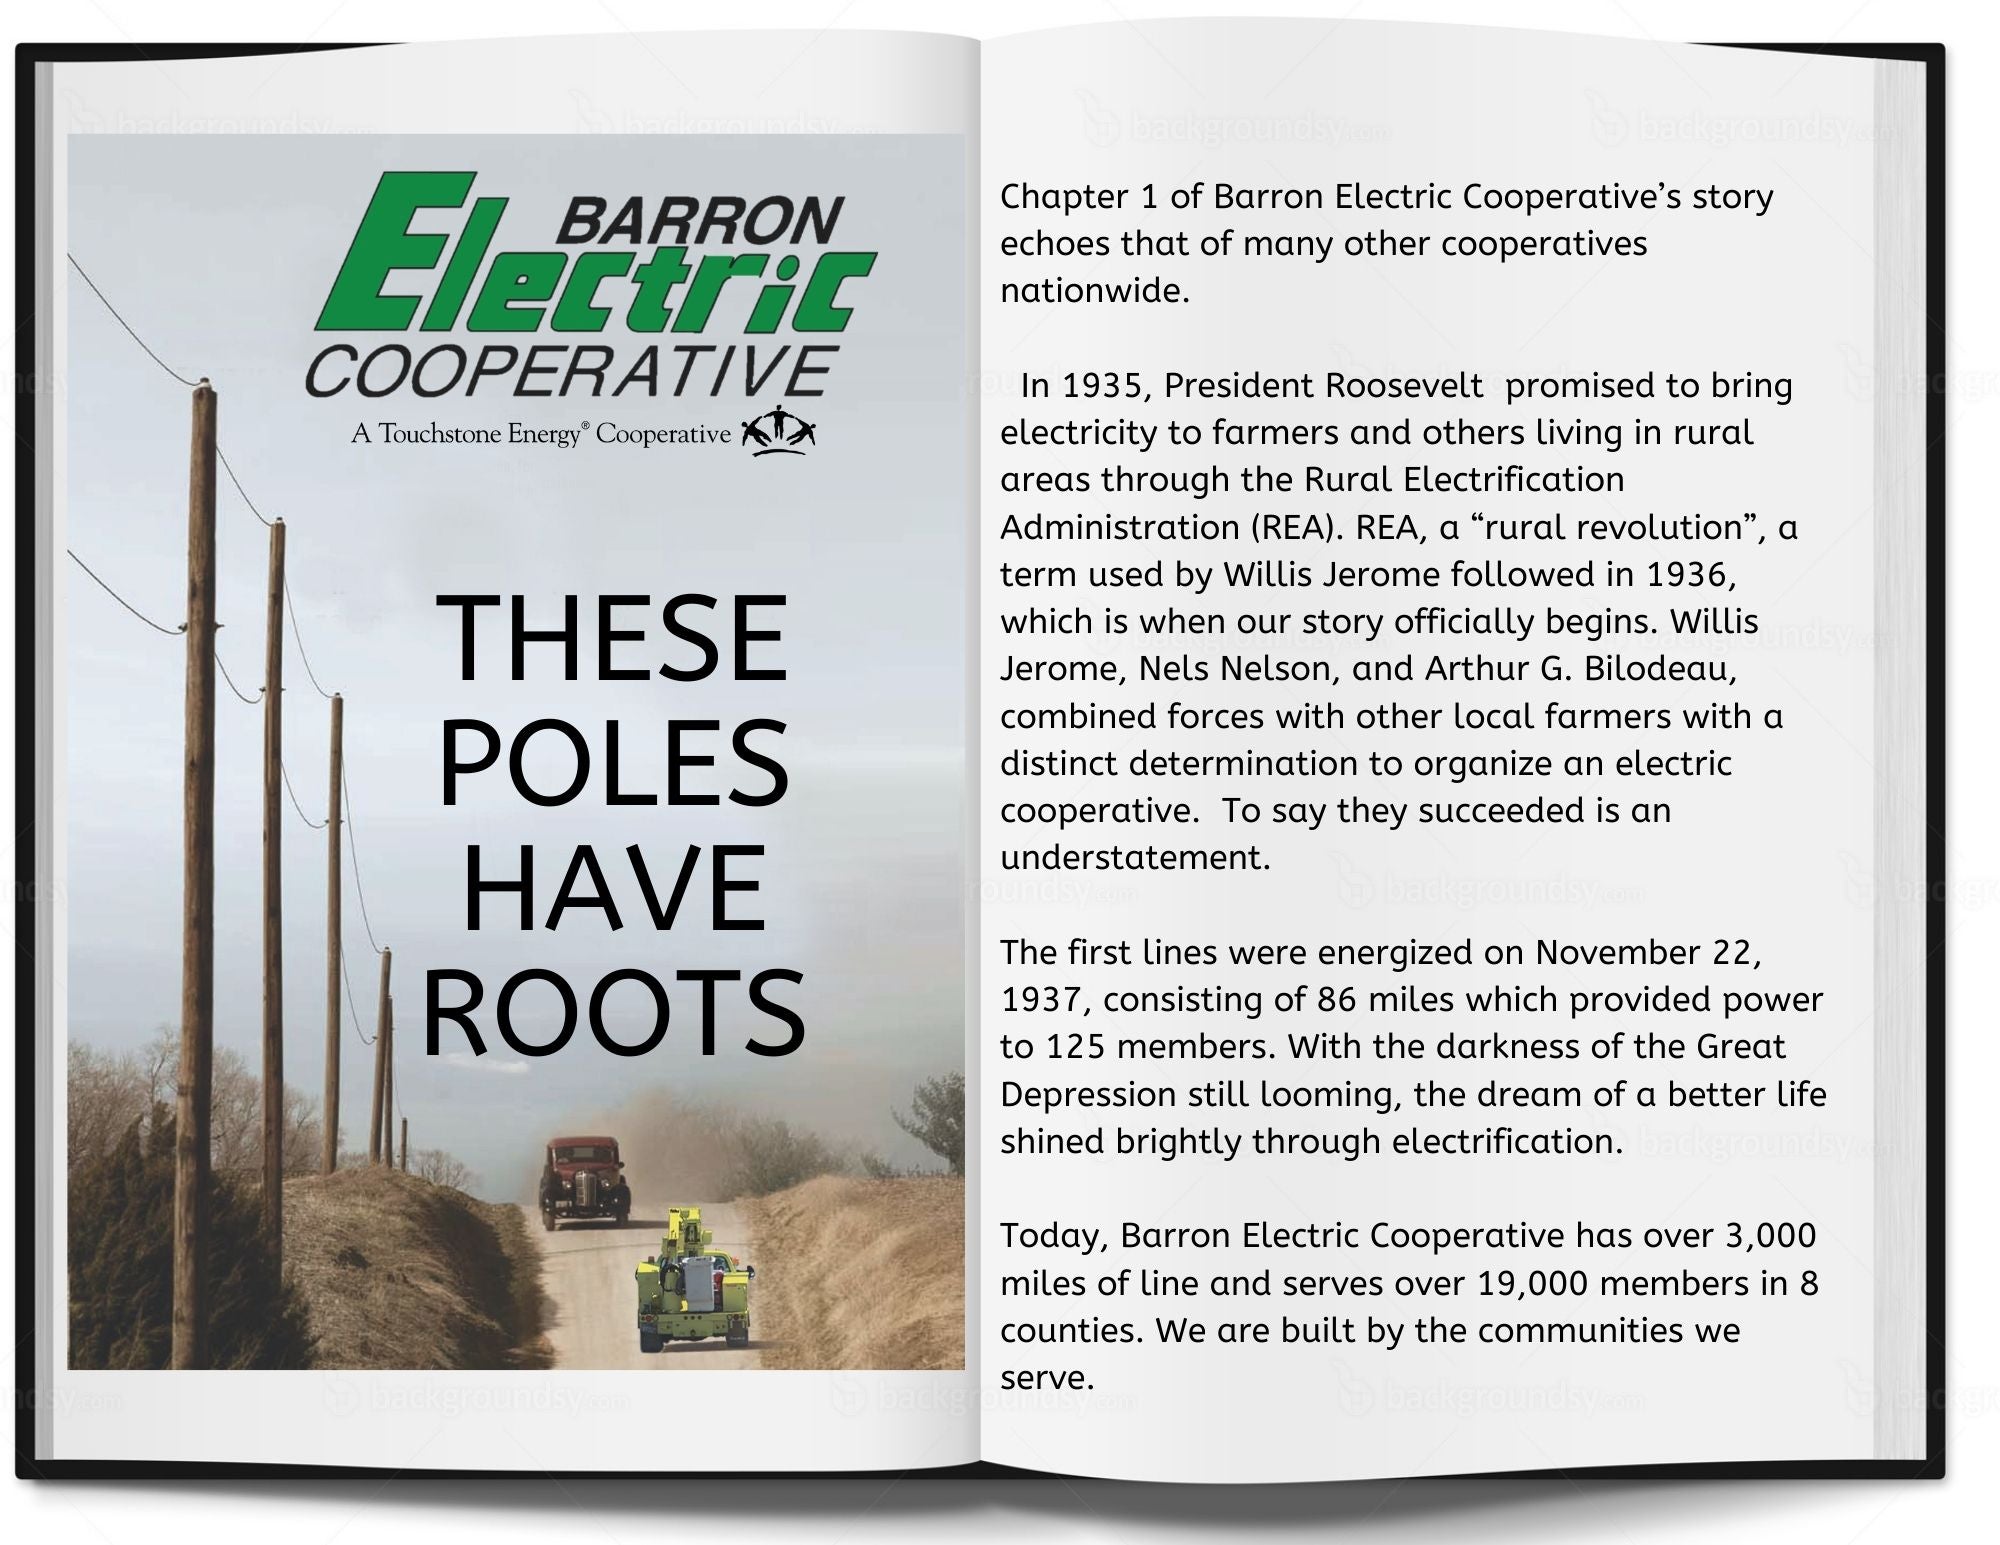 our-story-barron-electric-cooperative